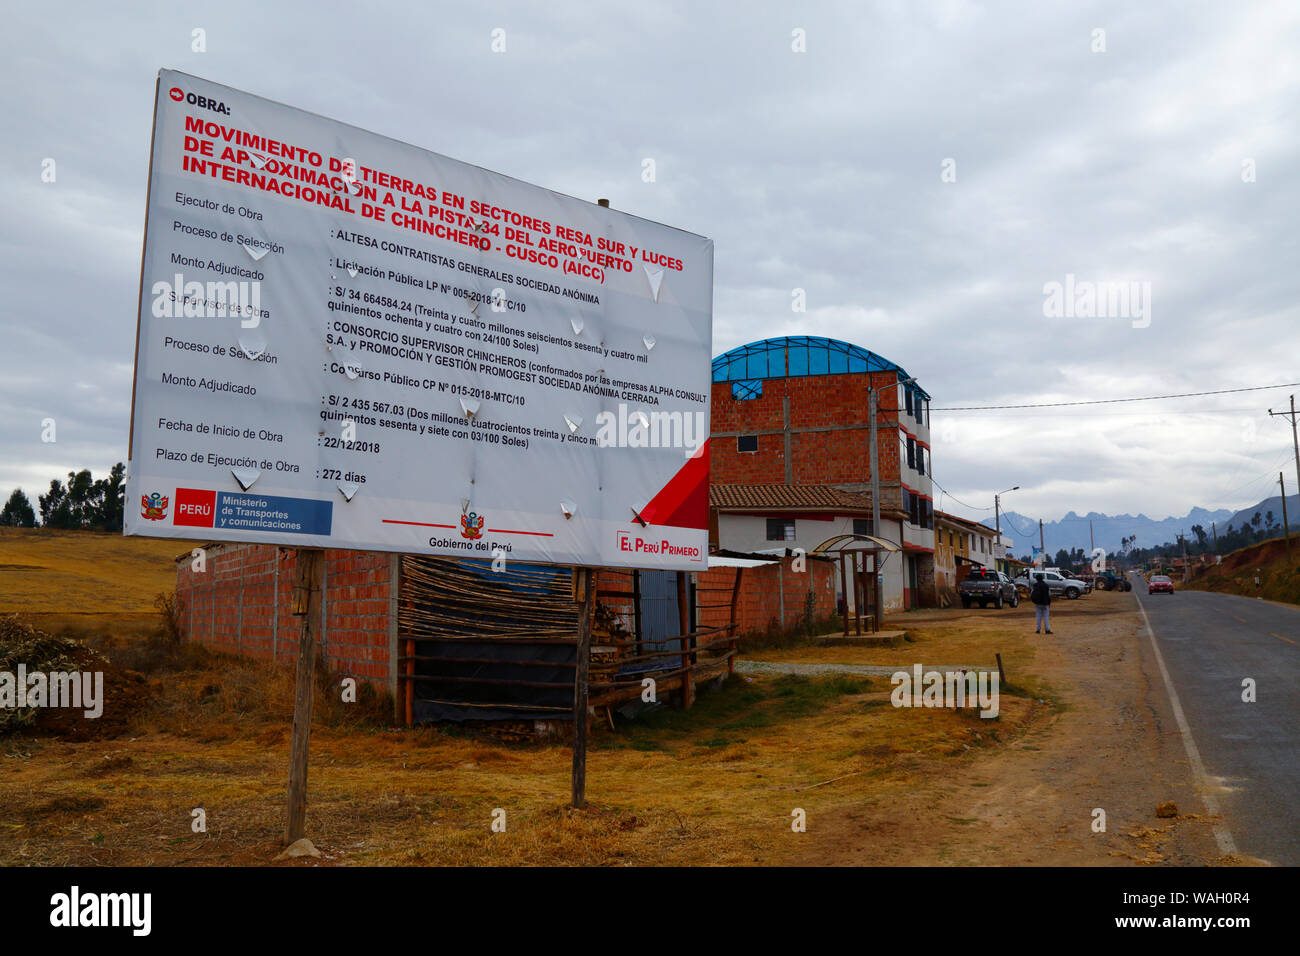 Sign announcing details of earth moving works, the start of the construction of a new international airport at Chinchero for Cusco and Machu Picchu. Cusco Region, Peru Stock Photo